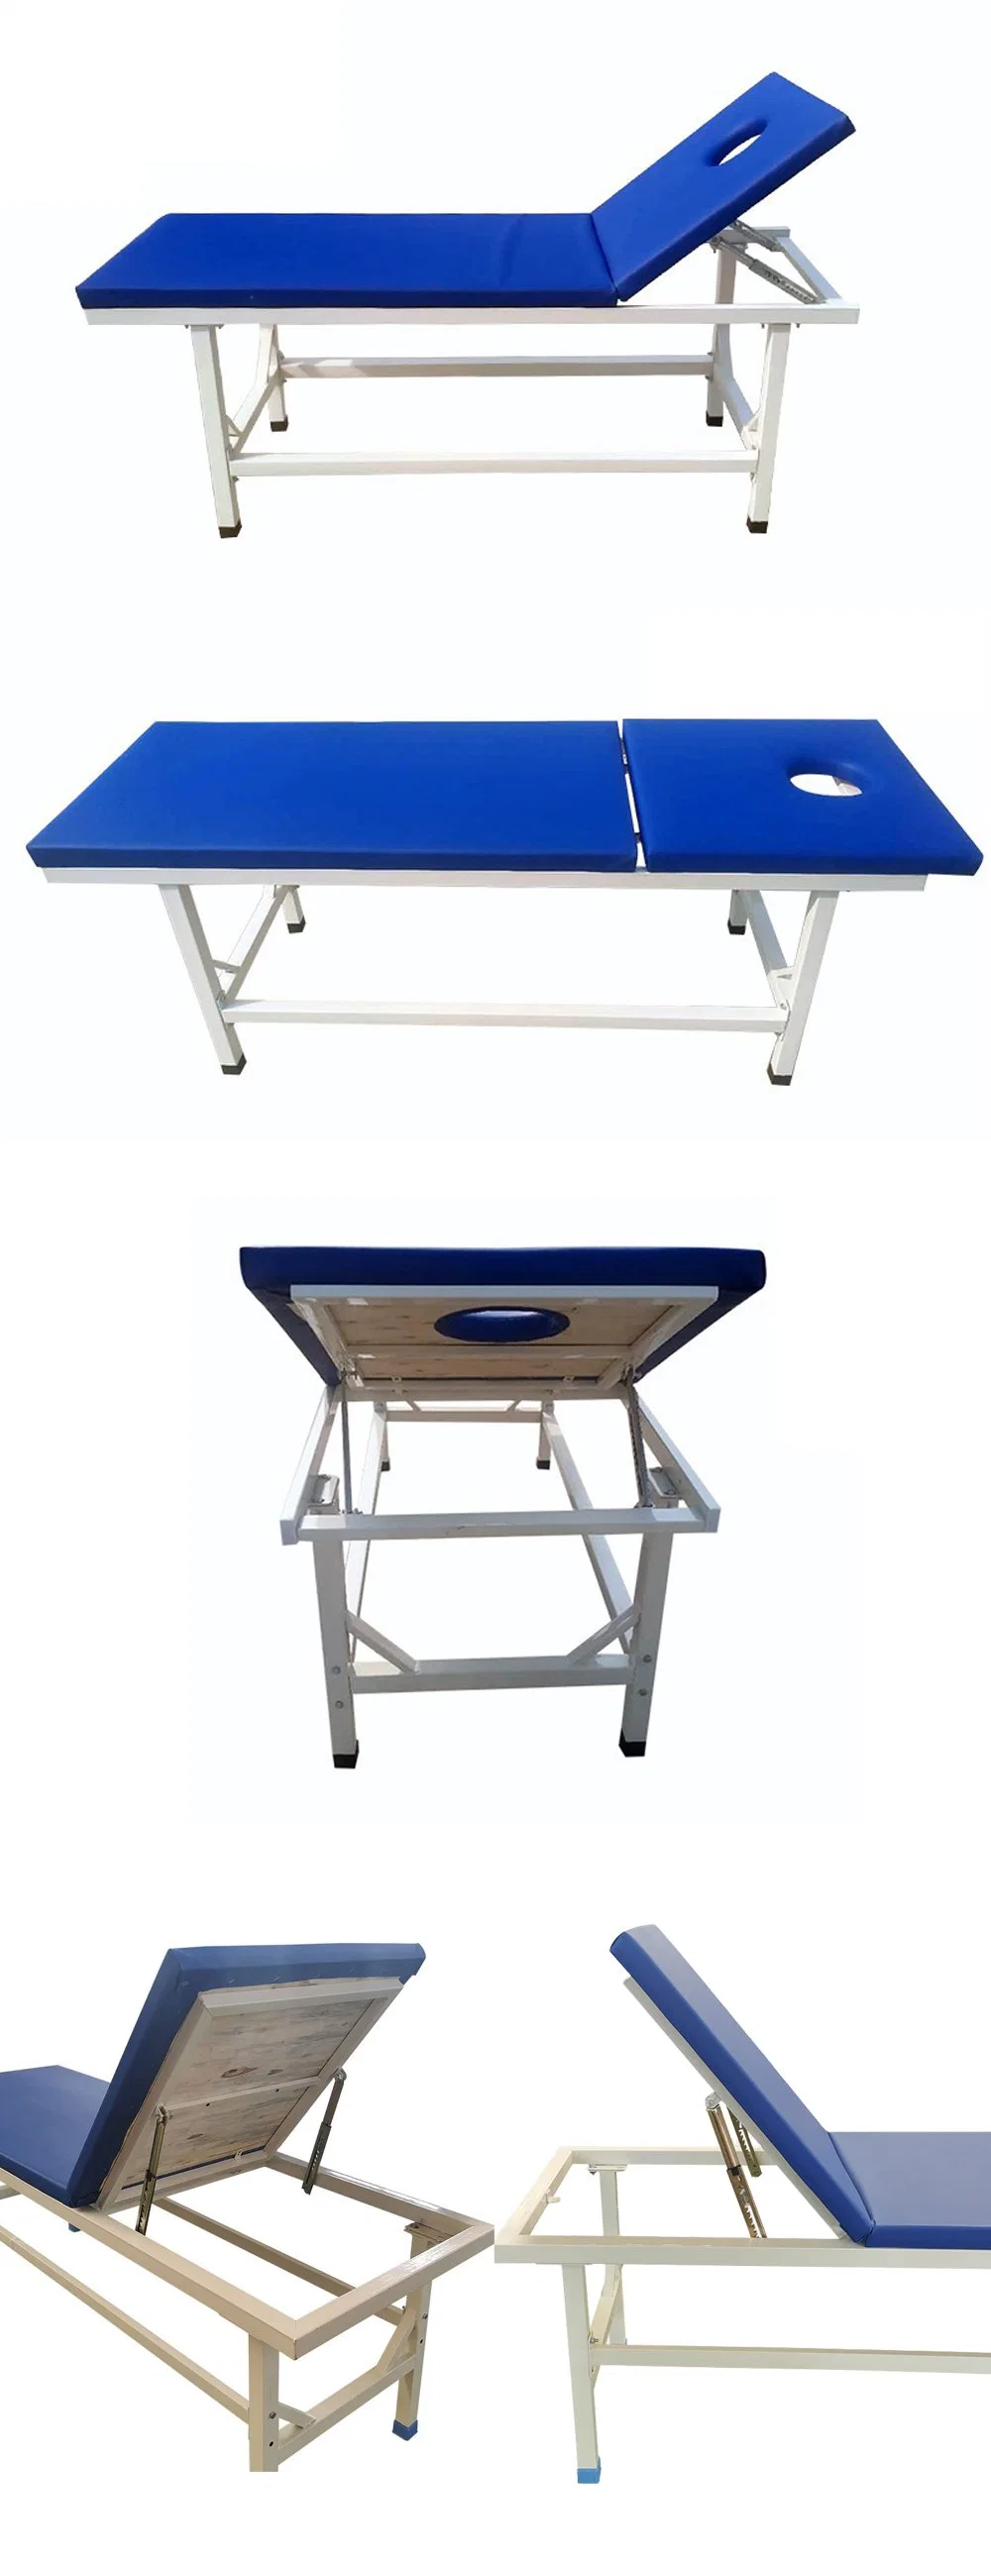 China Factory Wholesale Price Medical Hospital Clinic Patient Obstetric Gynecological Gynecology Manual Exam Table Massage Examination Bed